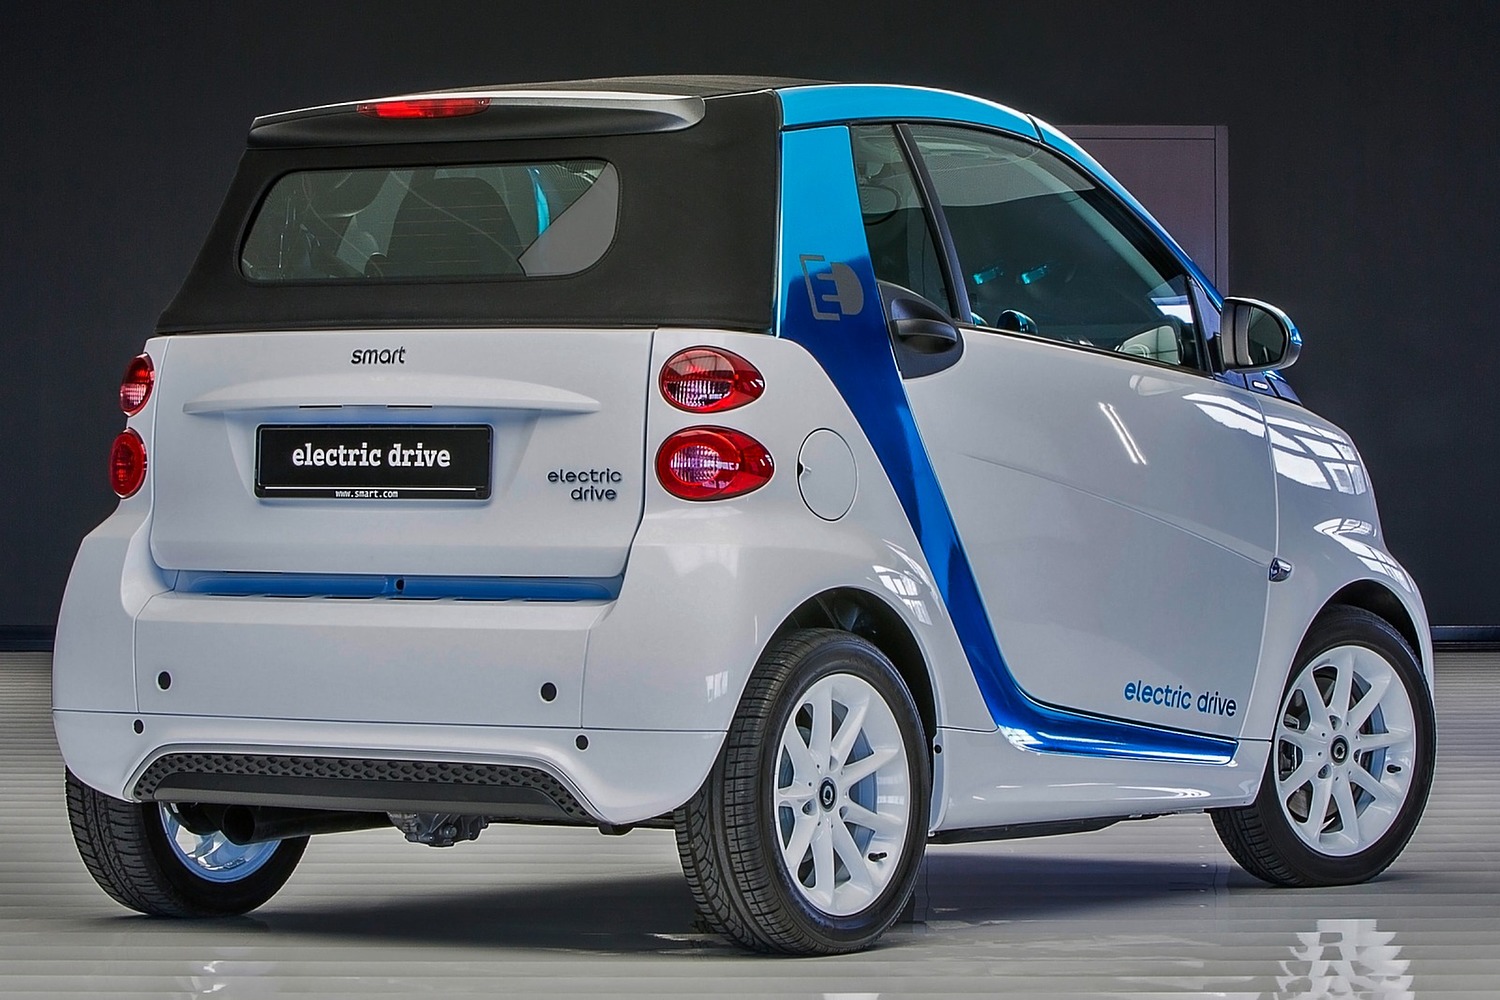 smart fortwo electric drive 2dr Hatchback Exterior (2013 model year shown)